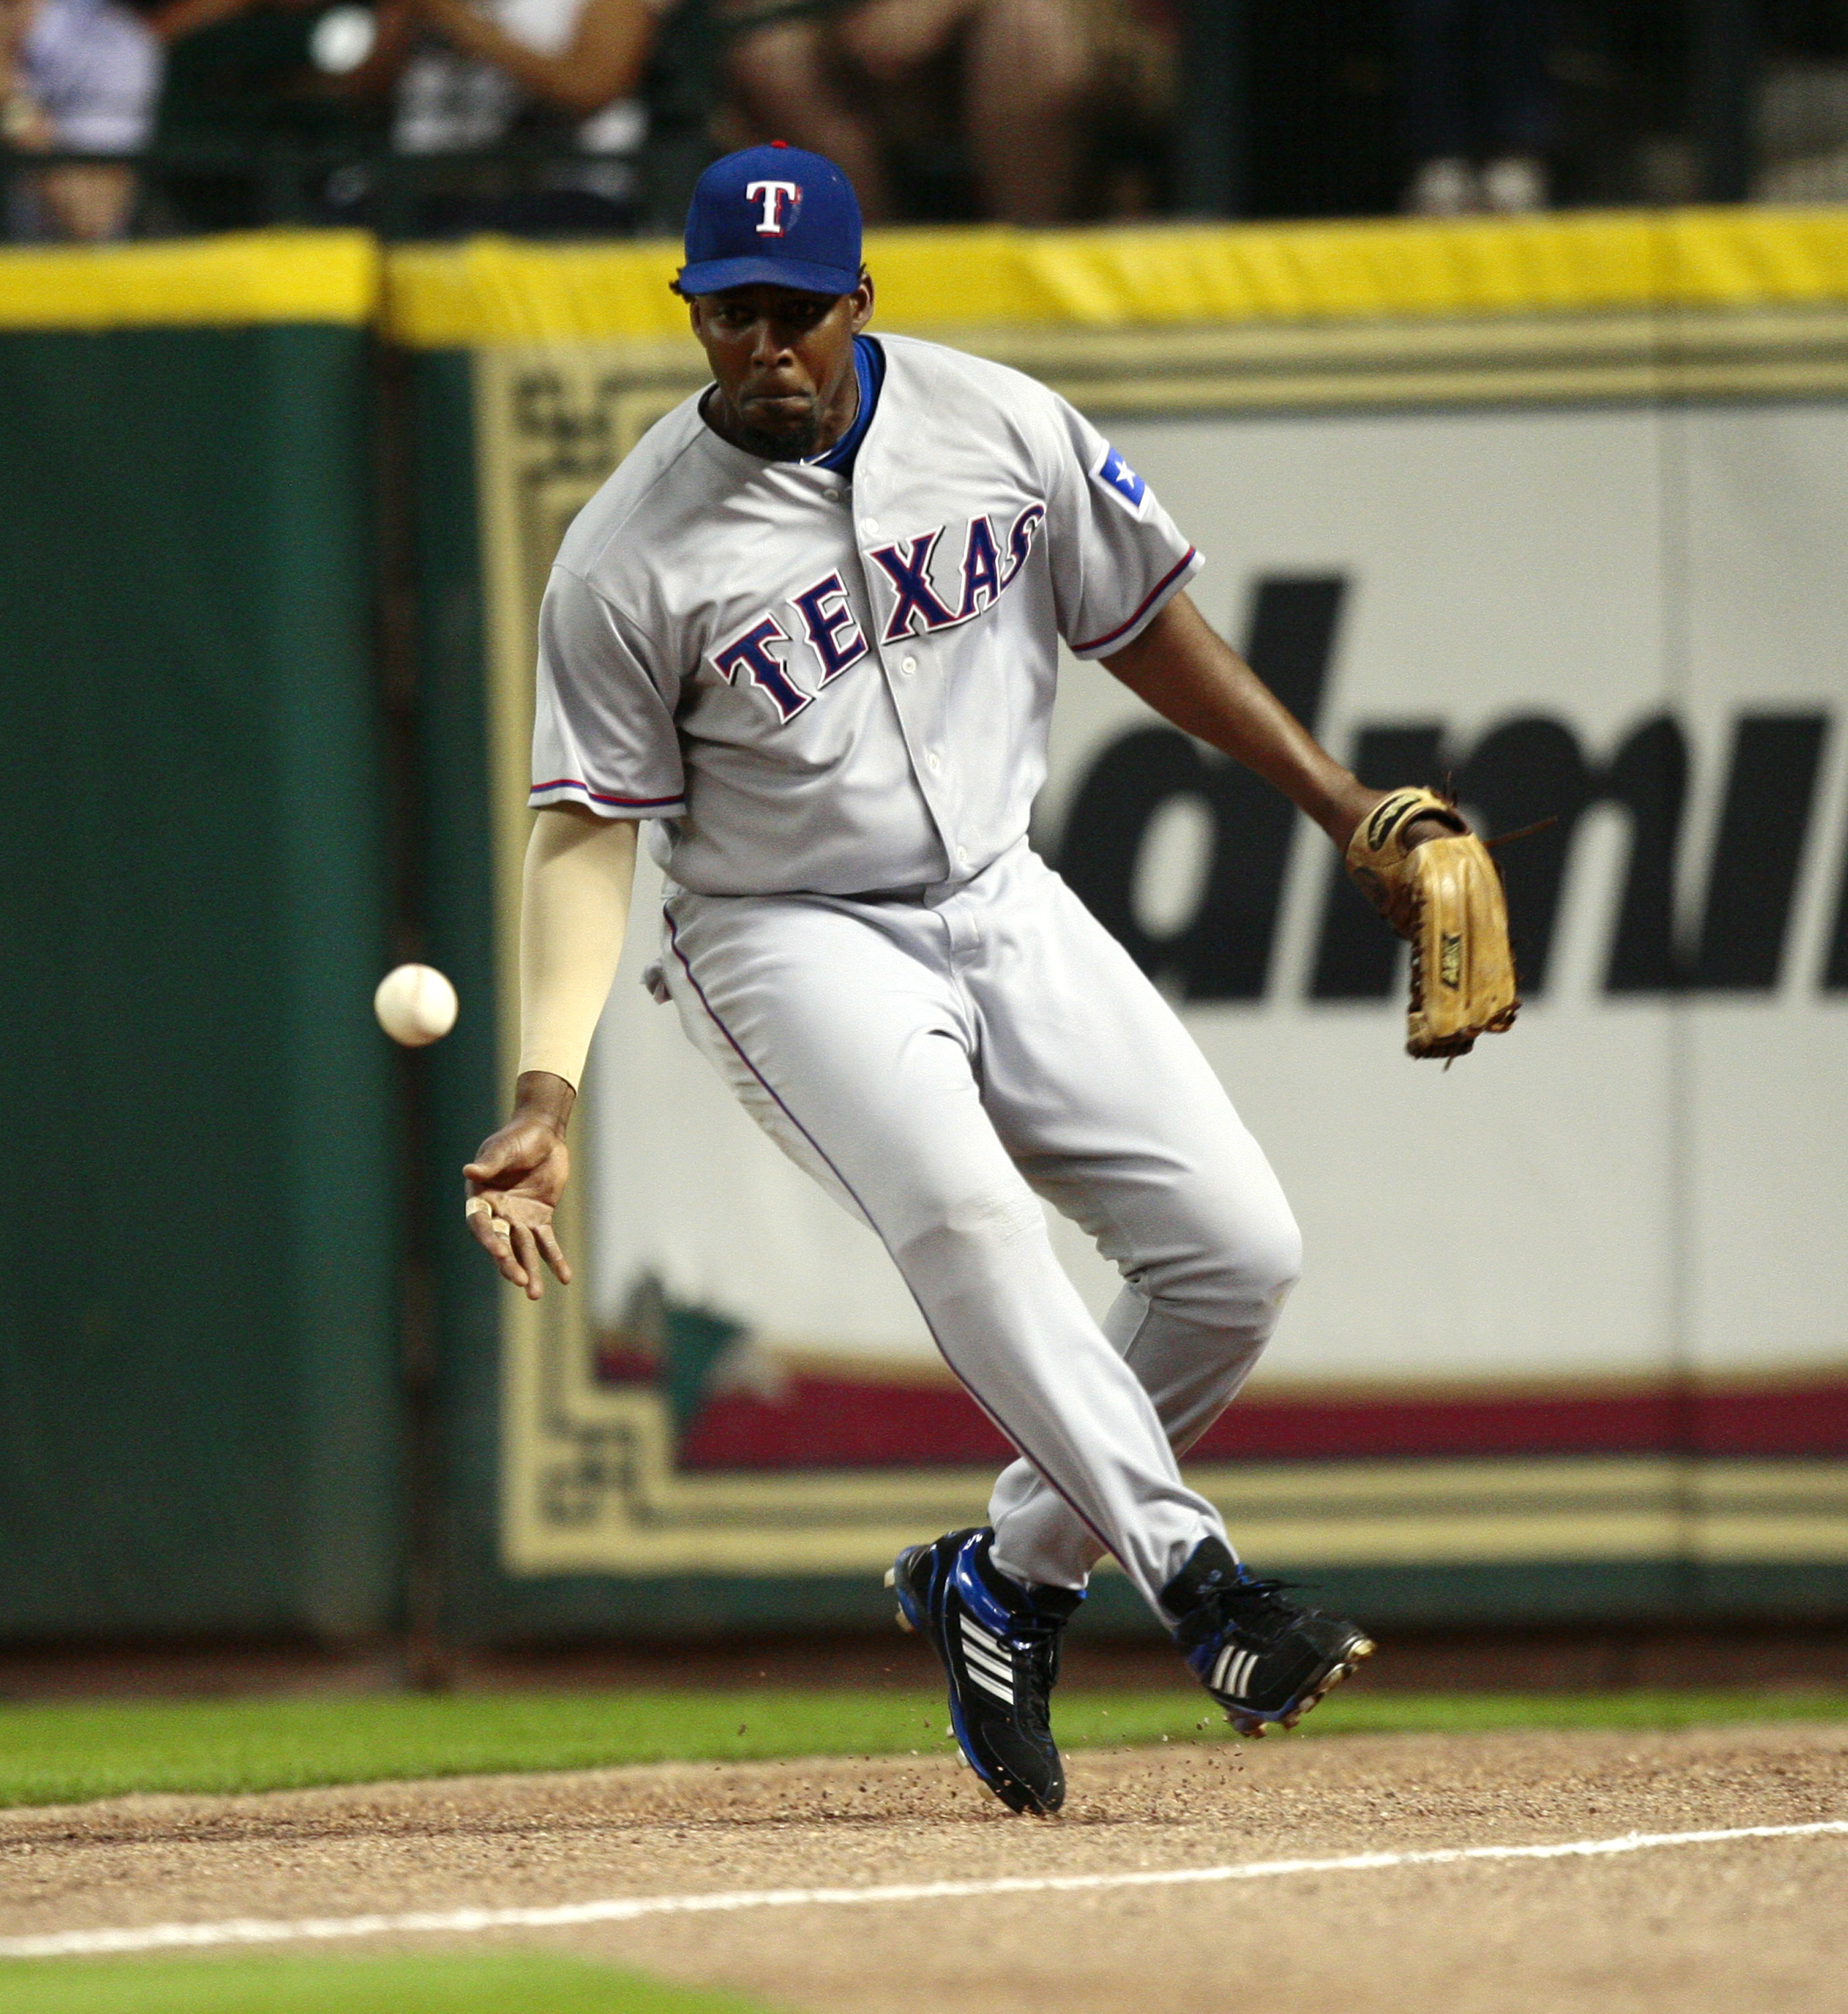 HOUSTON - JUNE 18:  Right fielder Vladimir Guerrero #27 of the Texas Rangers fields a ball hit by Hunter Pence of the Houston Astros during the fourth inning at Minute Maid Park on June 18, 2010 in Houston, Texas.  (Photo by Bob Levey/Getty Images)